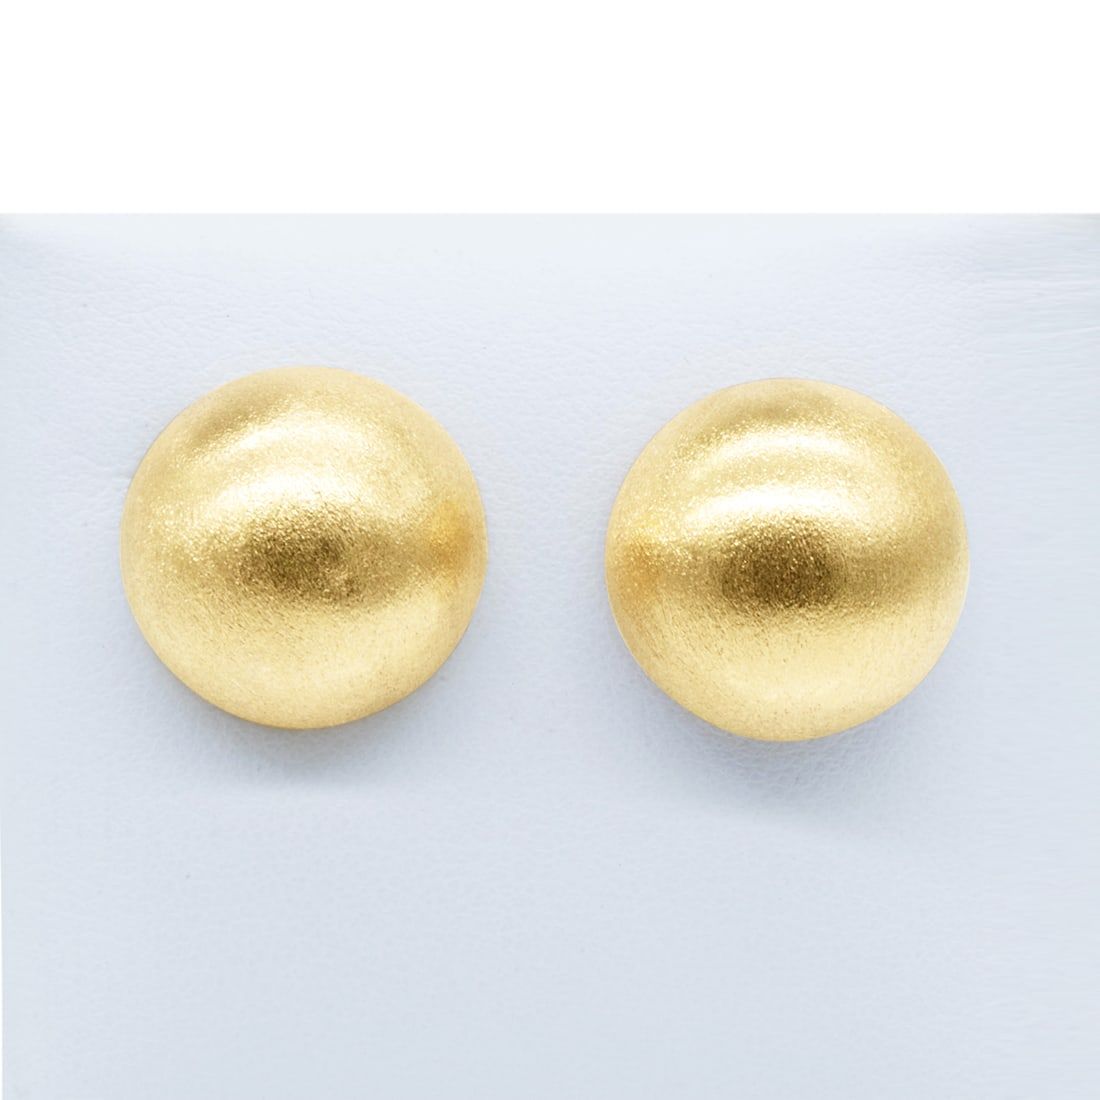 18K YELLOW GOLD BRUSHED DOME EARRINGS18k